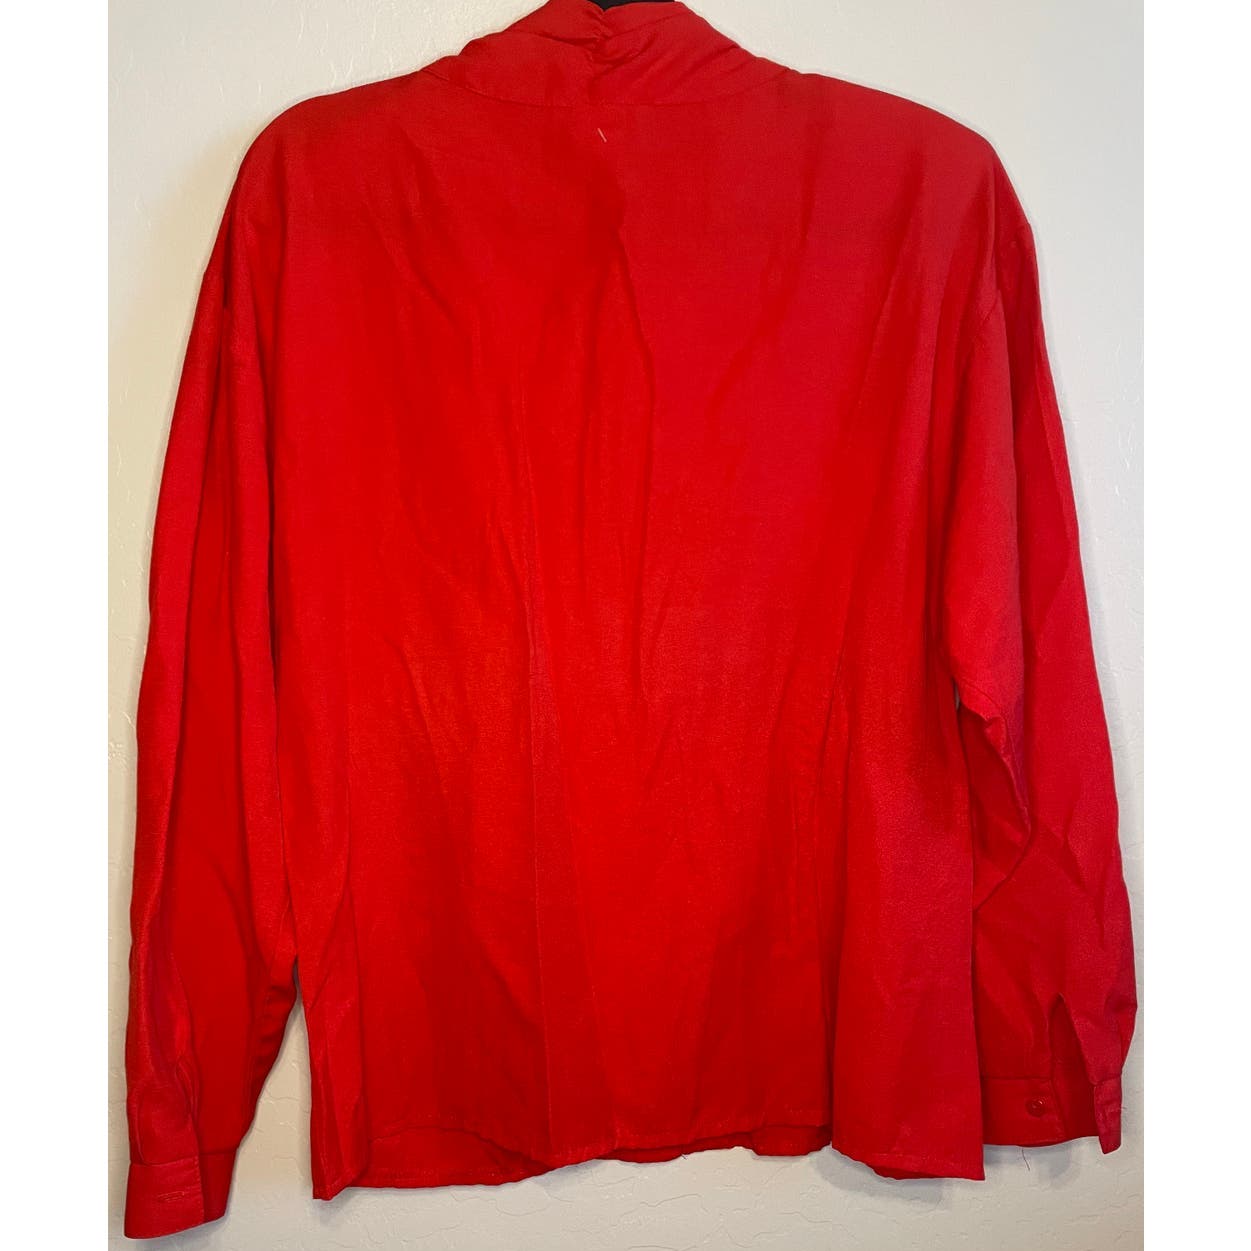 Vintage 80s Red City Girl Long Sleeve